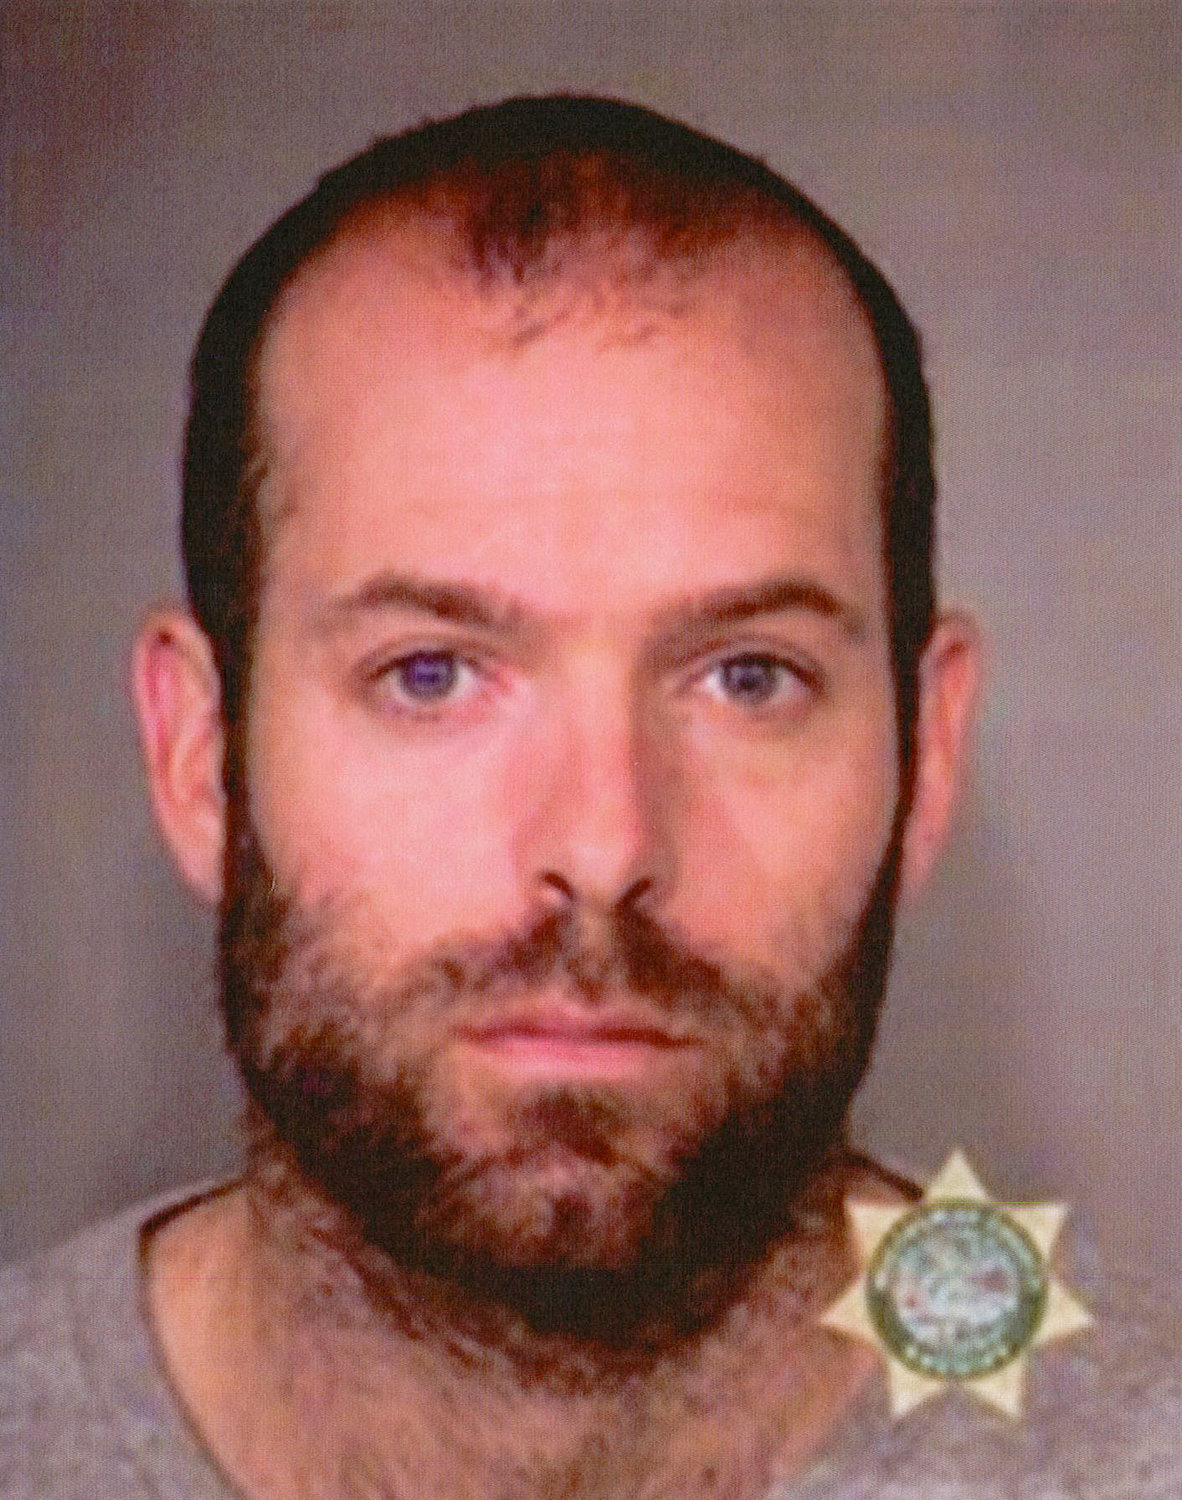 Mug shot of Daniel Charles Svoboda from his arrest and booking into the Multnomah County Jail in Portland, Oregon.